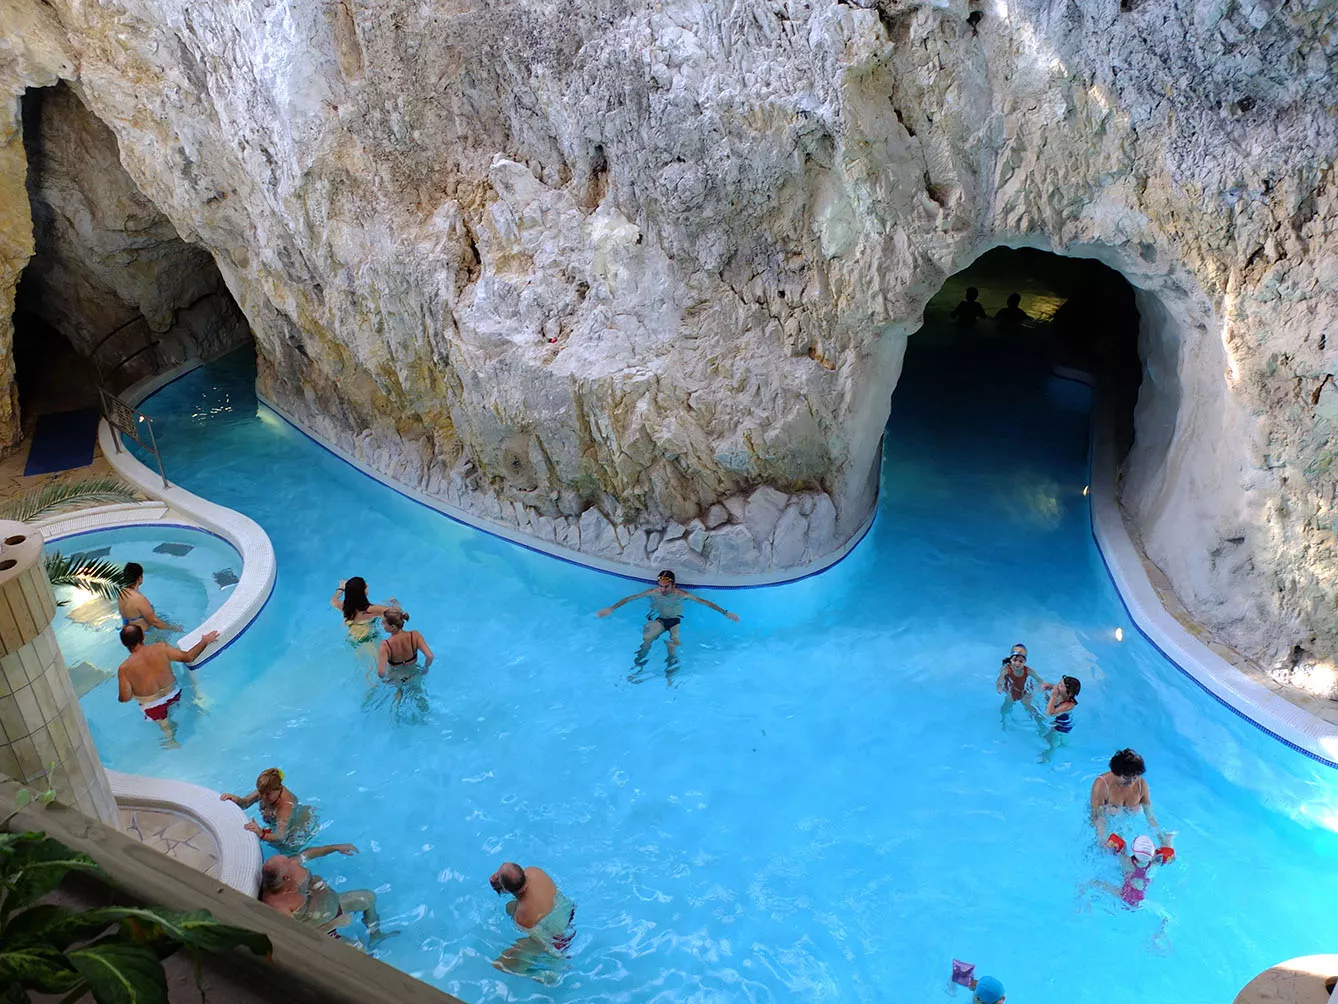 Miskolc Topolca cave baths with hot termal water, made in natural caves. People walk and swim in kind of canals made in the caves and enjoy hot therapeutic water